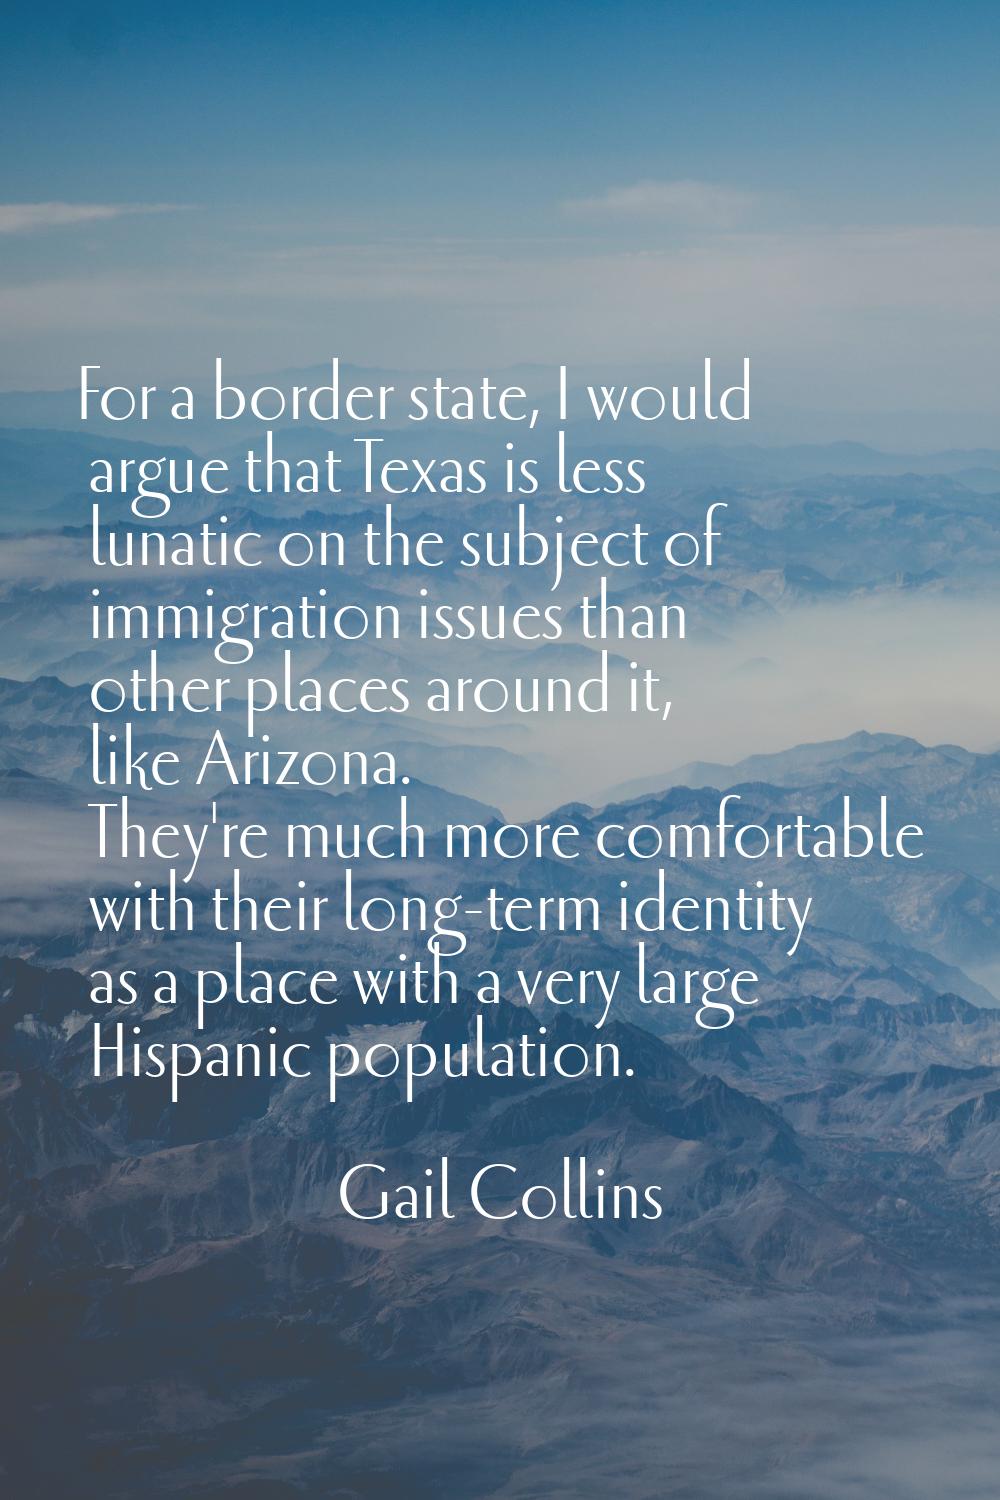 For a border state, I would argue that Texas is less lunatic on the subject of immigration issues t